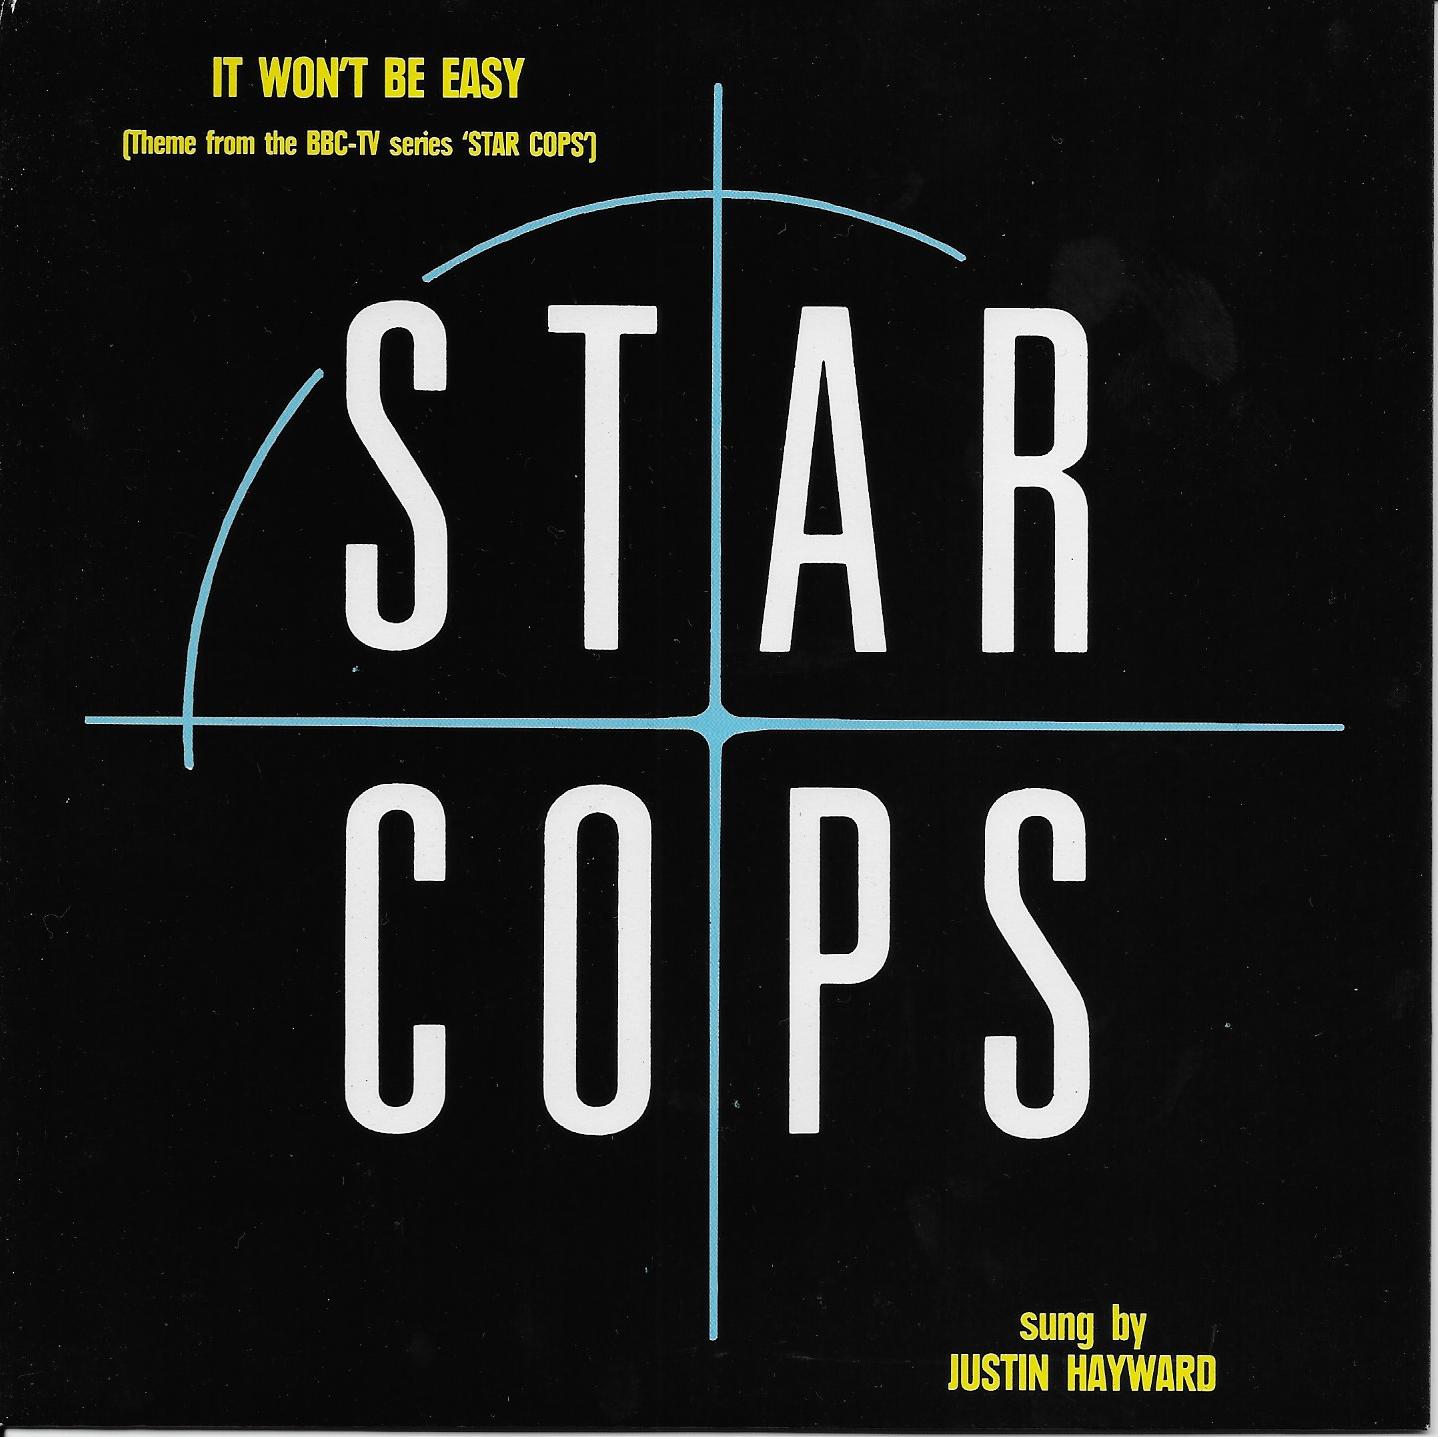 Picture of RESL 208 It won't be easy (Star cops) by artist Justin Hayward from the BBC singles - Records and Tapes library